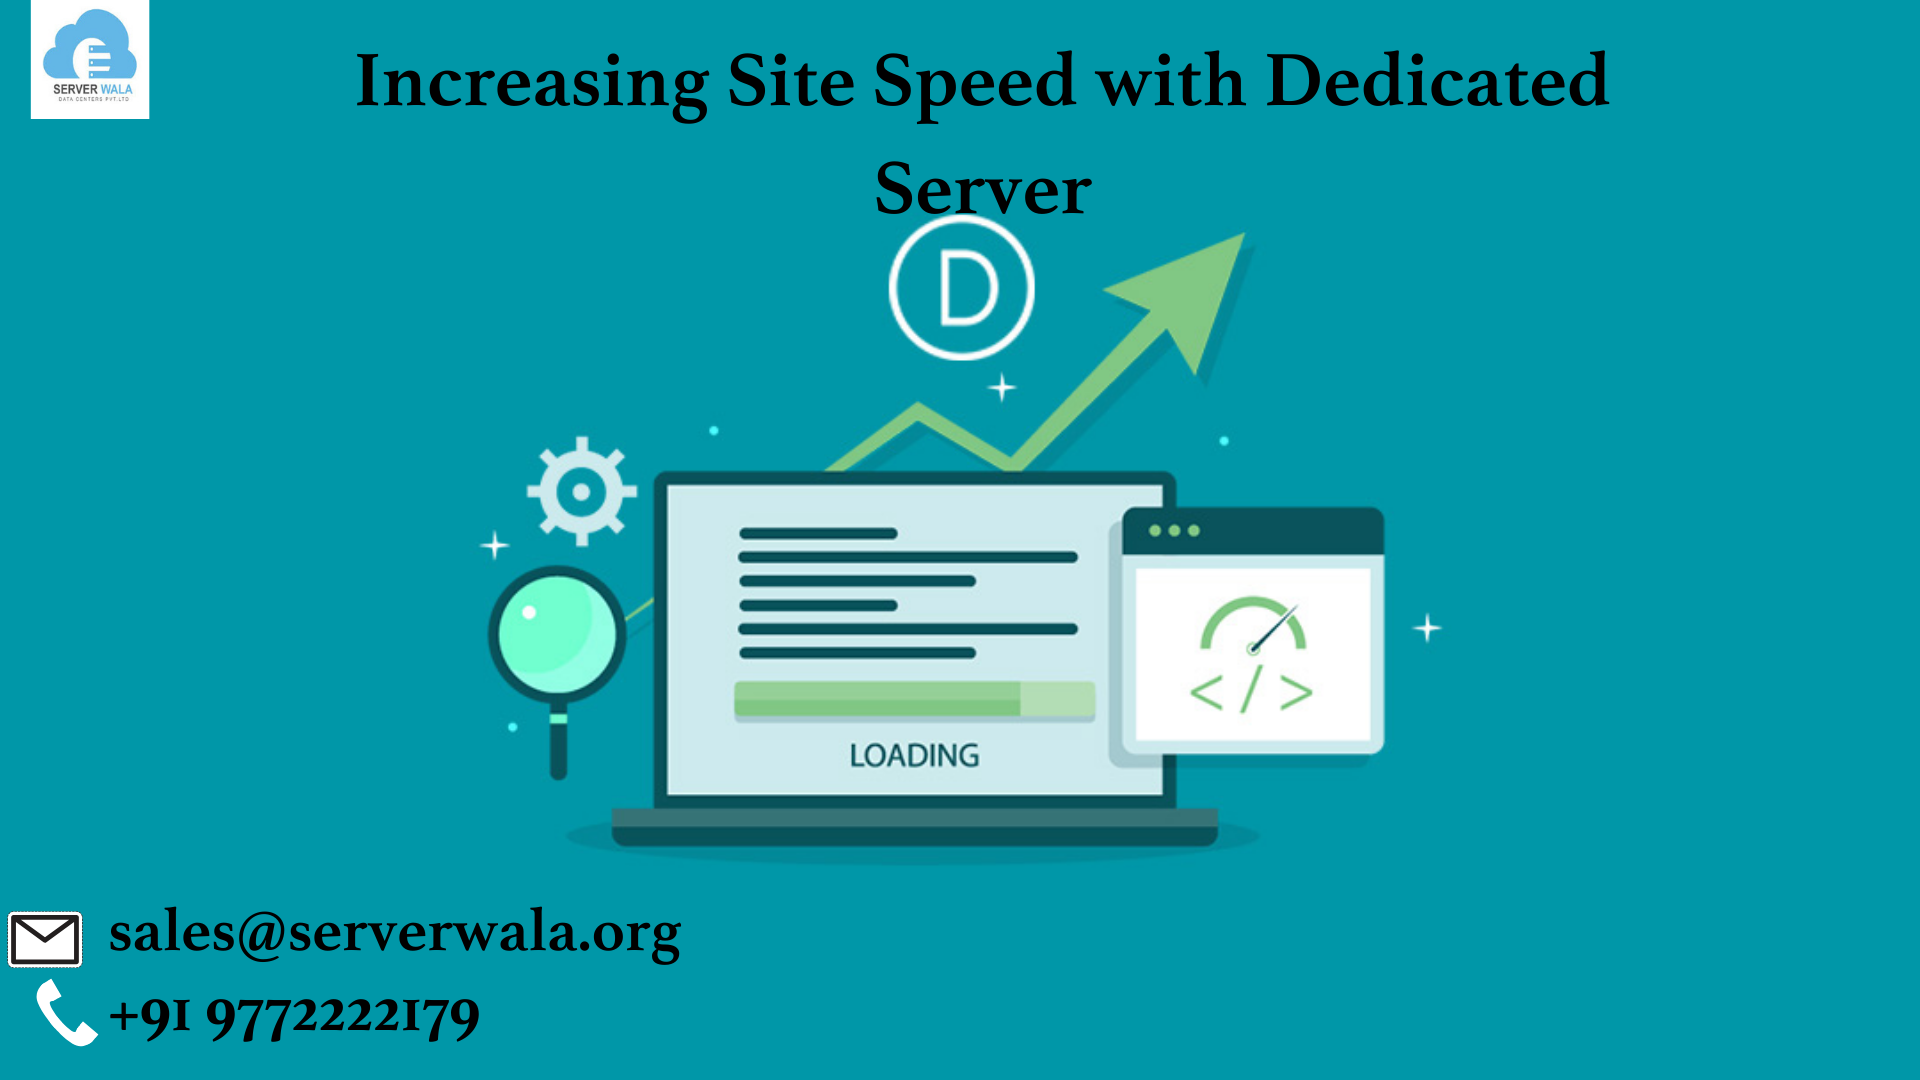 Increasing Site Speed with Dedicated Server